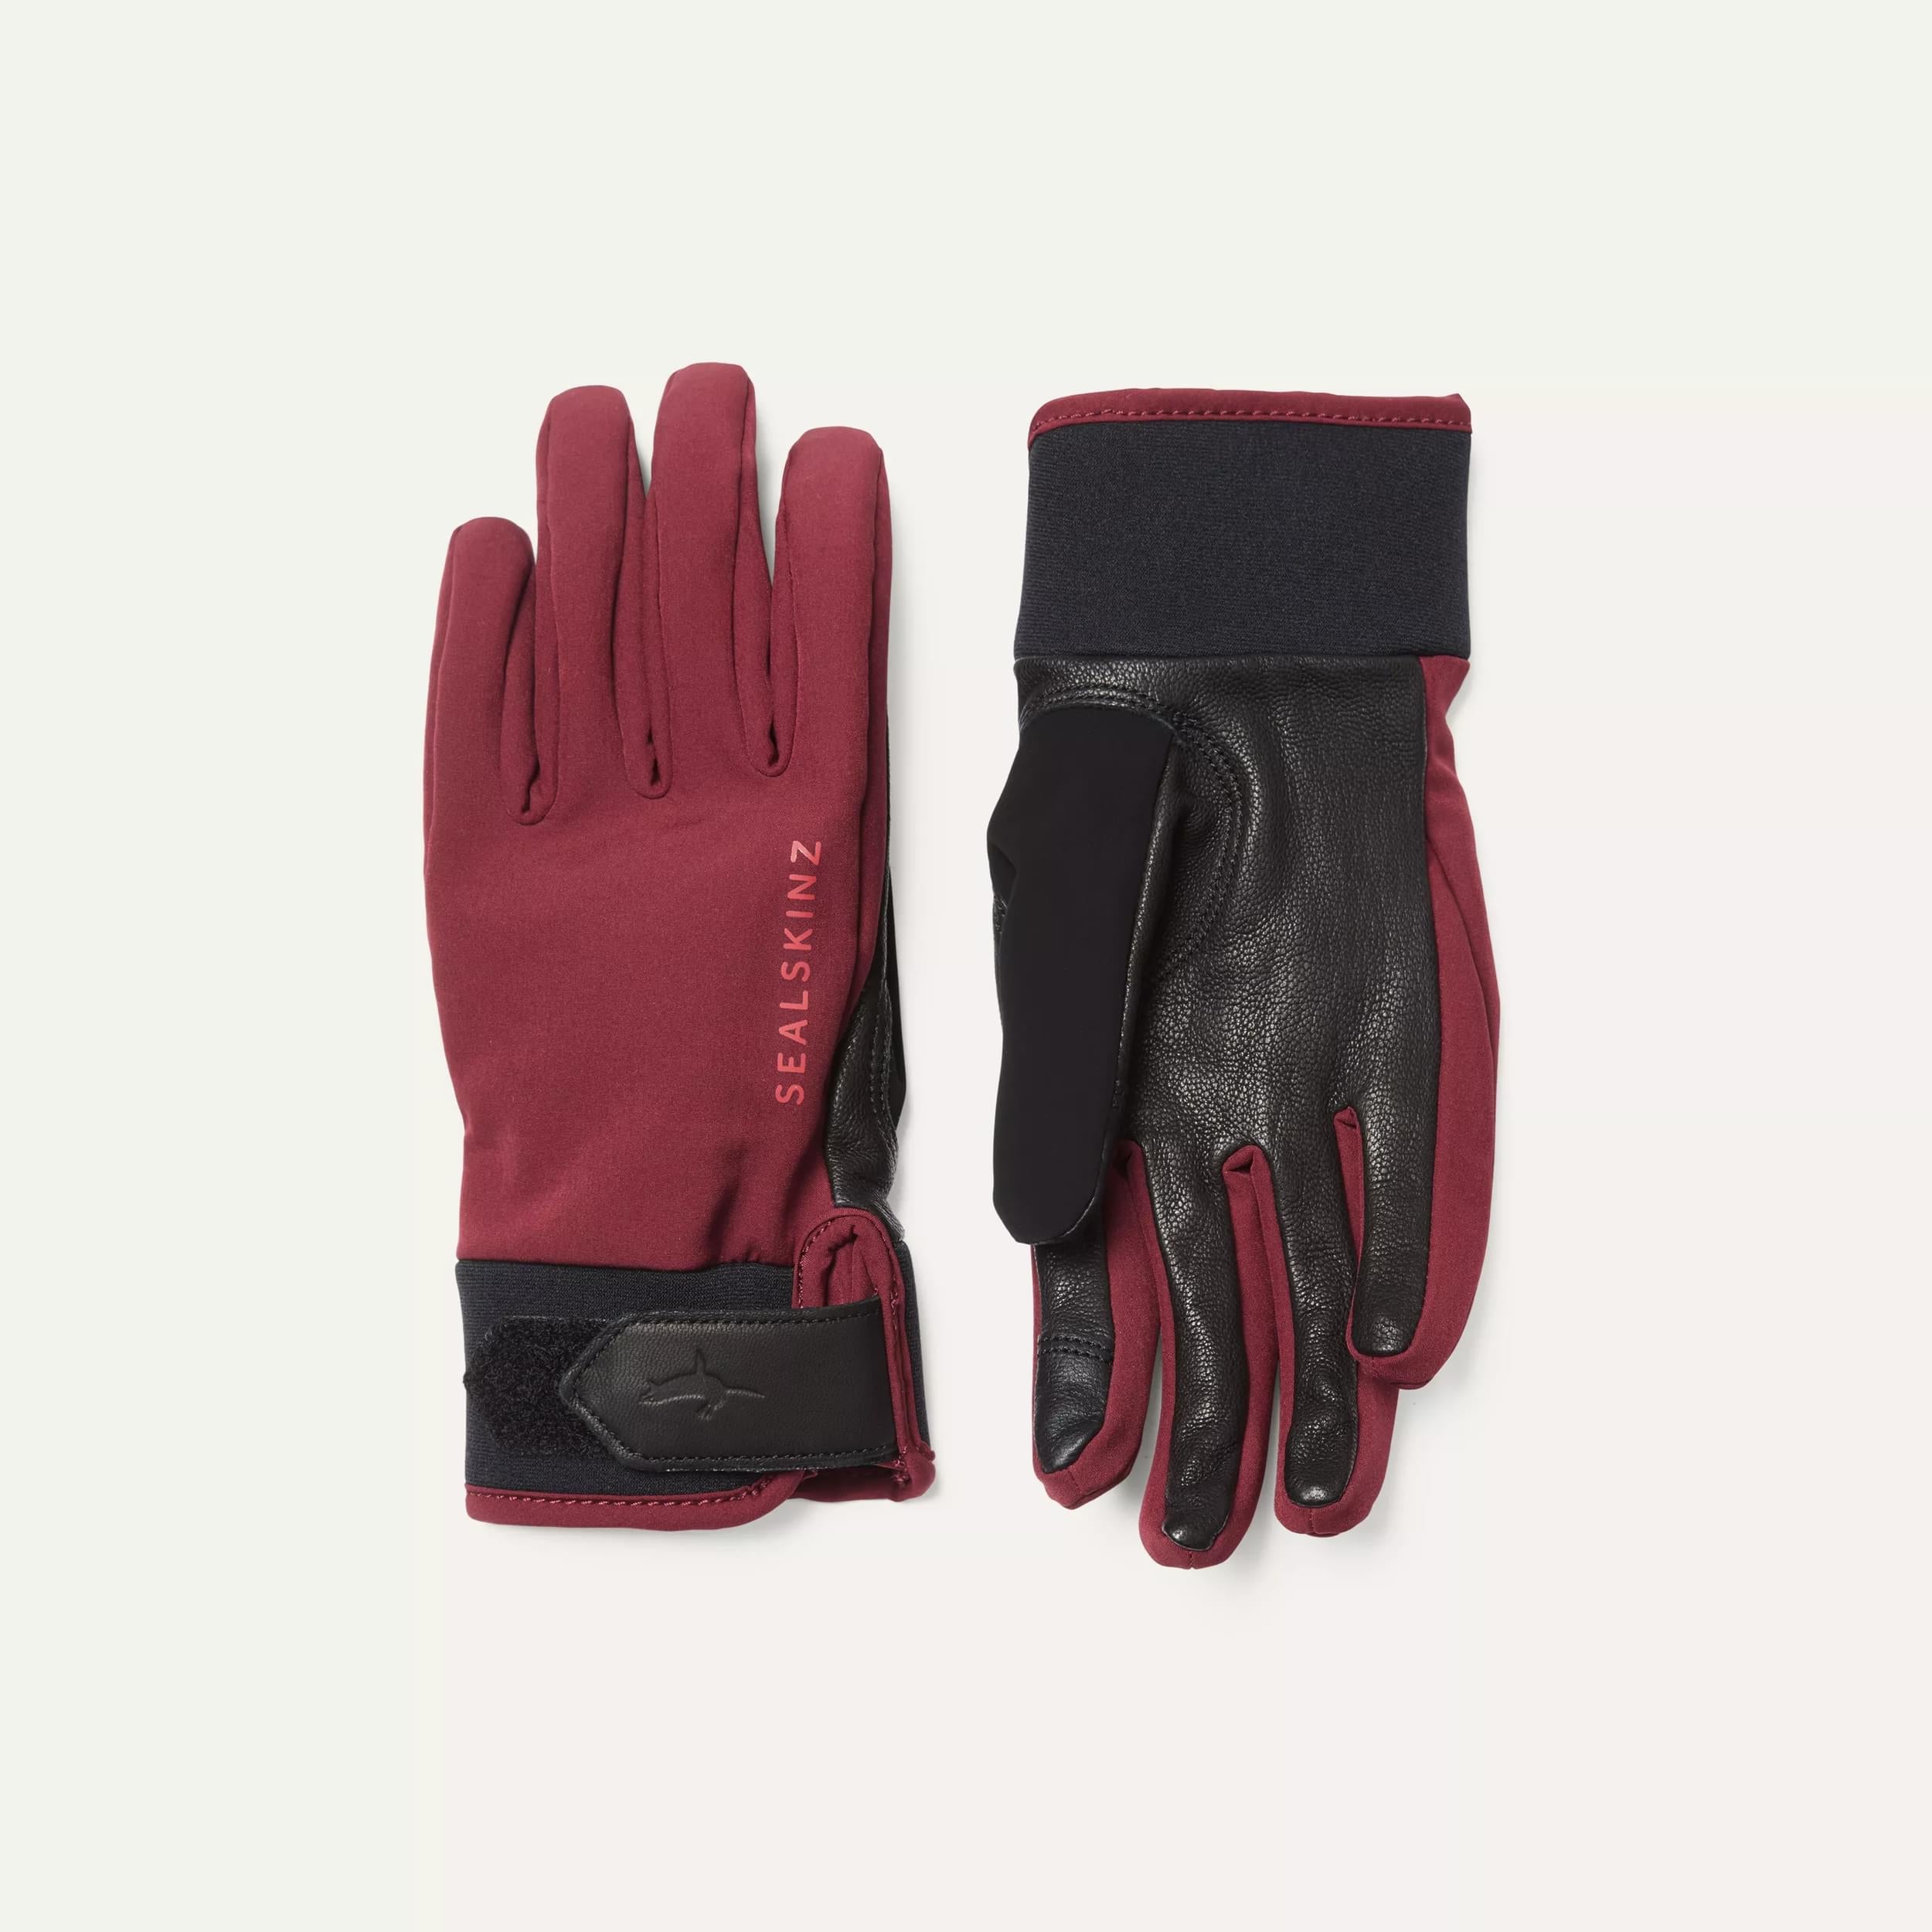 Women's Photography Gloves